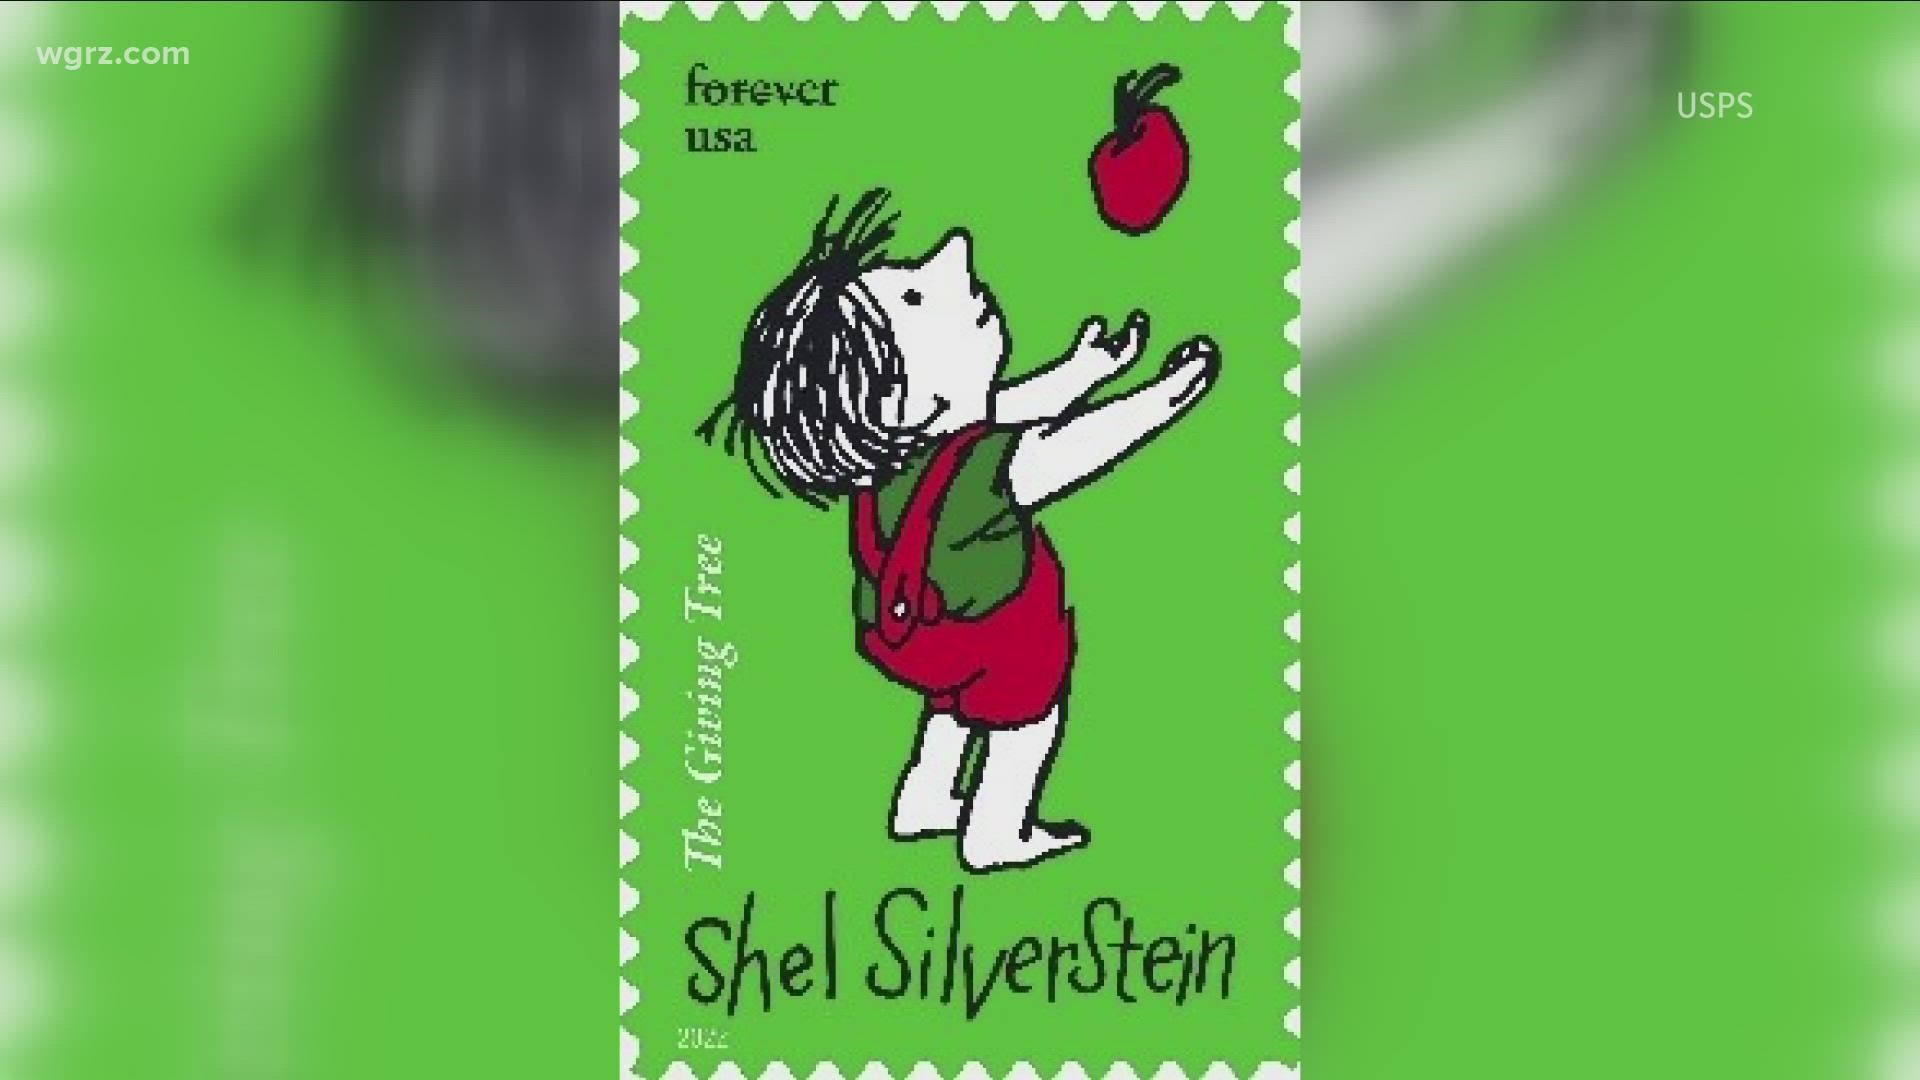 Forever stamp from the book The Giving Tree by Shel Silverstein